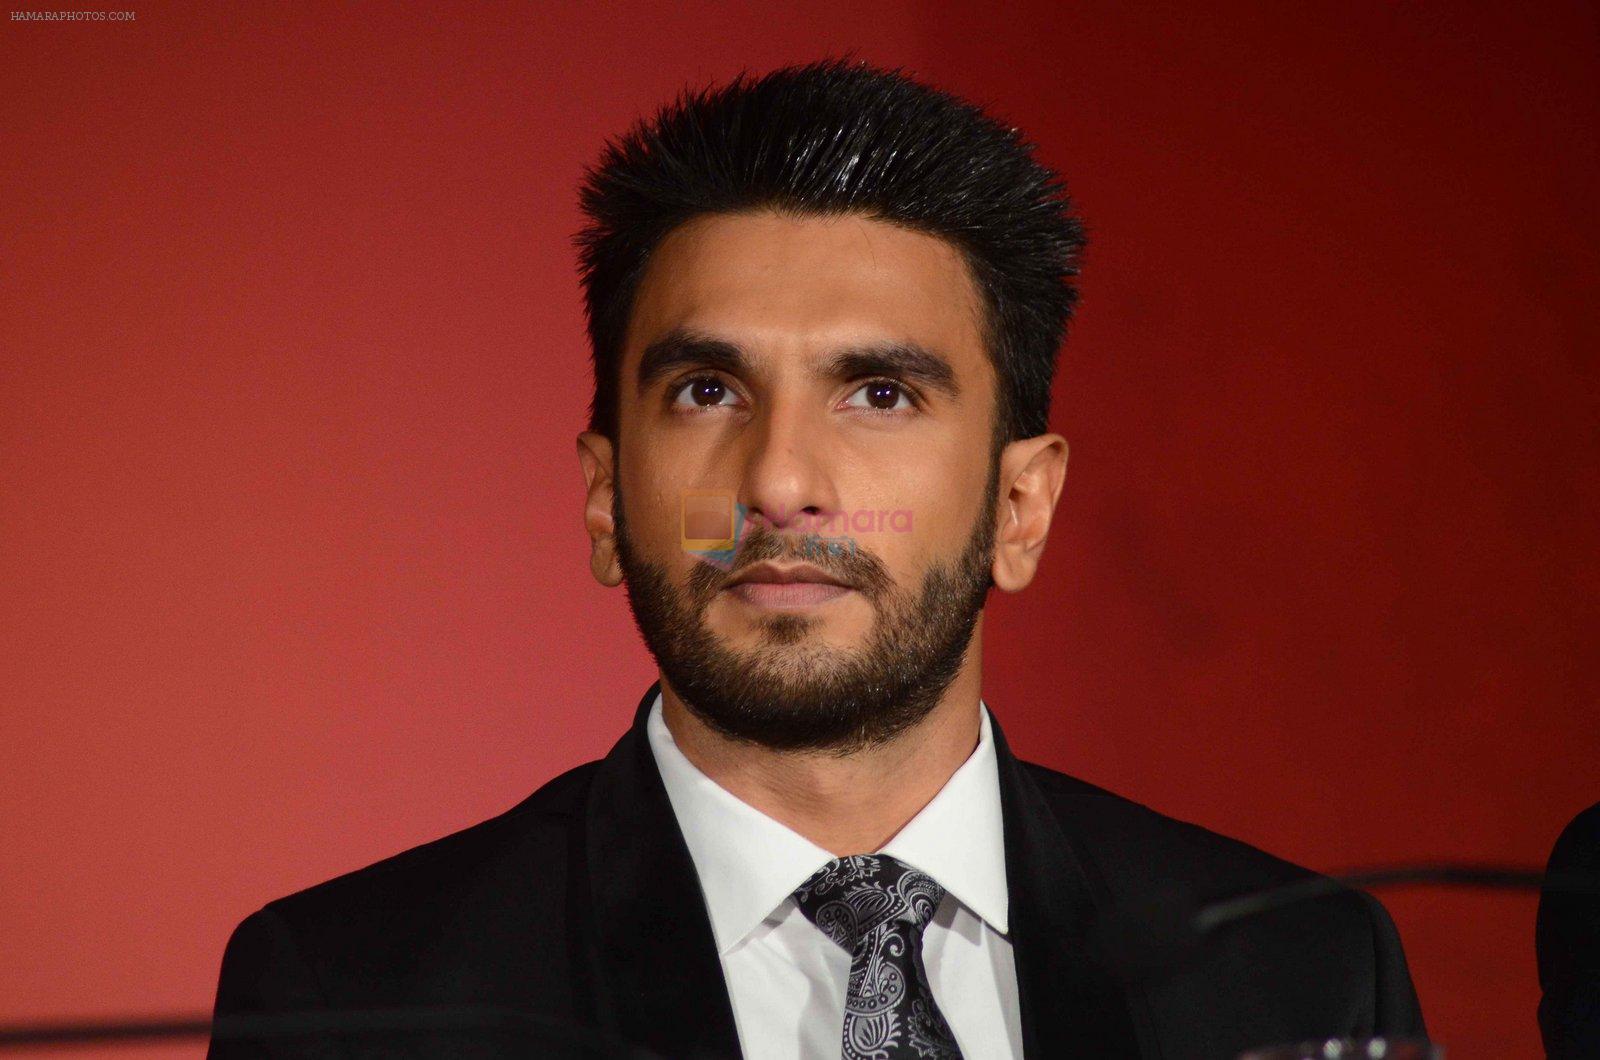 Ranveer Singh at Toronto's MOU with Film City on 5th Feb 2016